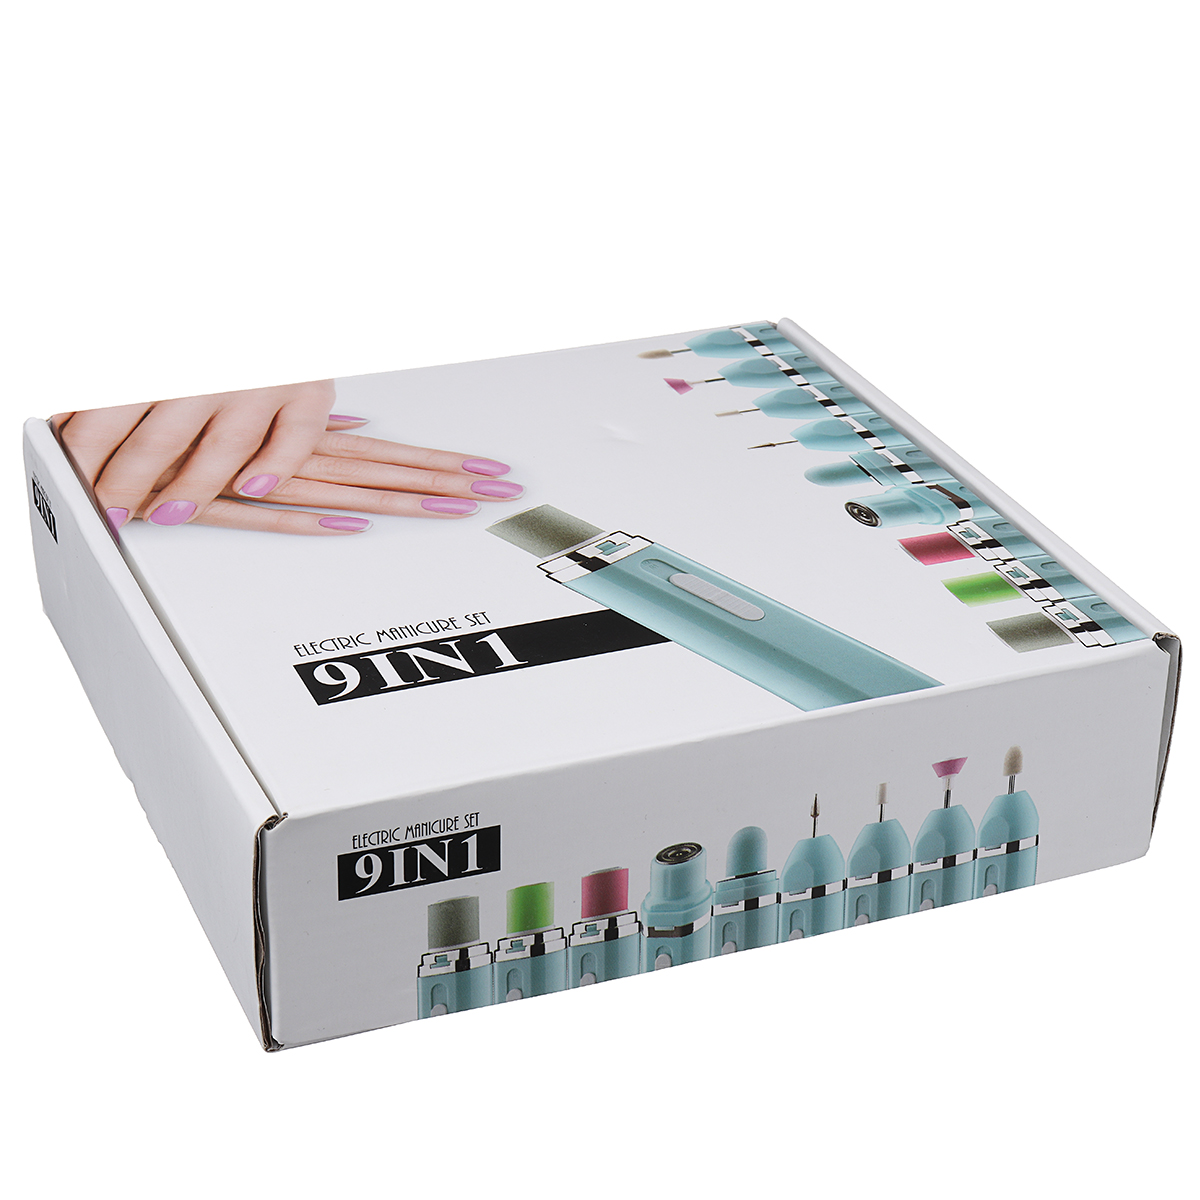 9-in-1-Manicure-Tools-Kit-Drill-Bits-Nail-Polishing-Gel-Remove-Grinder-Sanding-Paper-Shaver-1256112